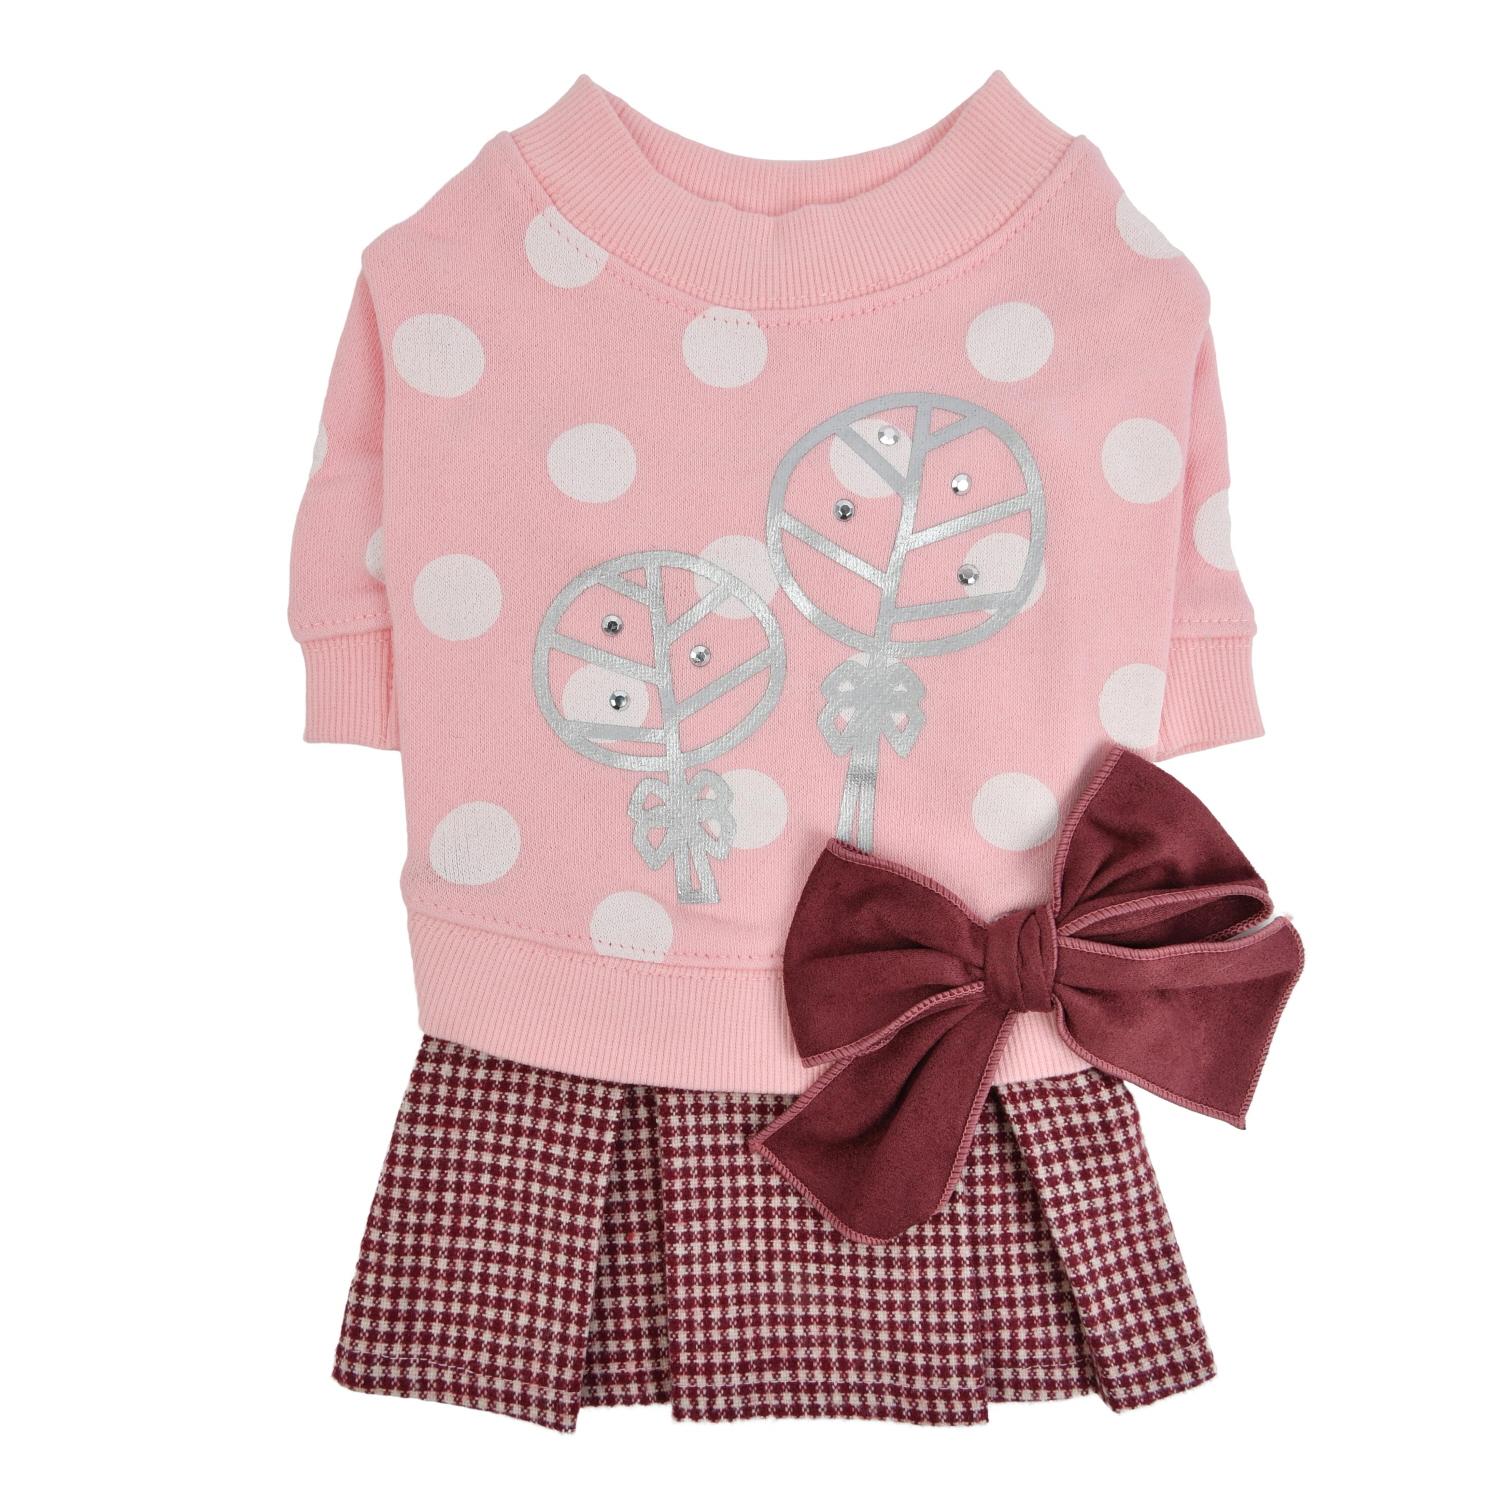 Mignon Dog Dress by Pinkaholic - Pink